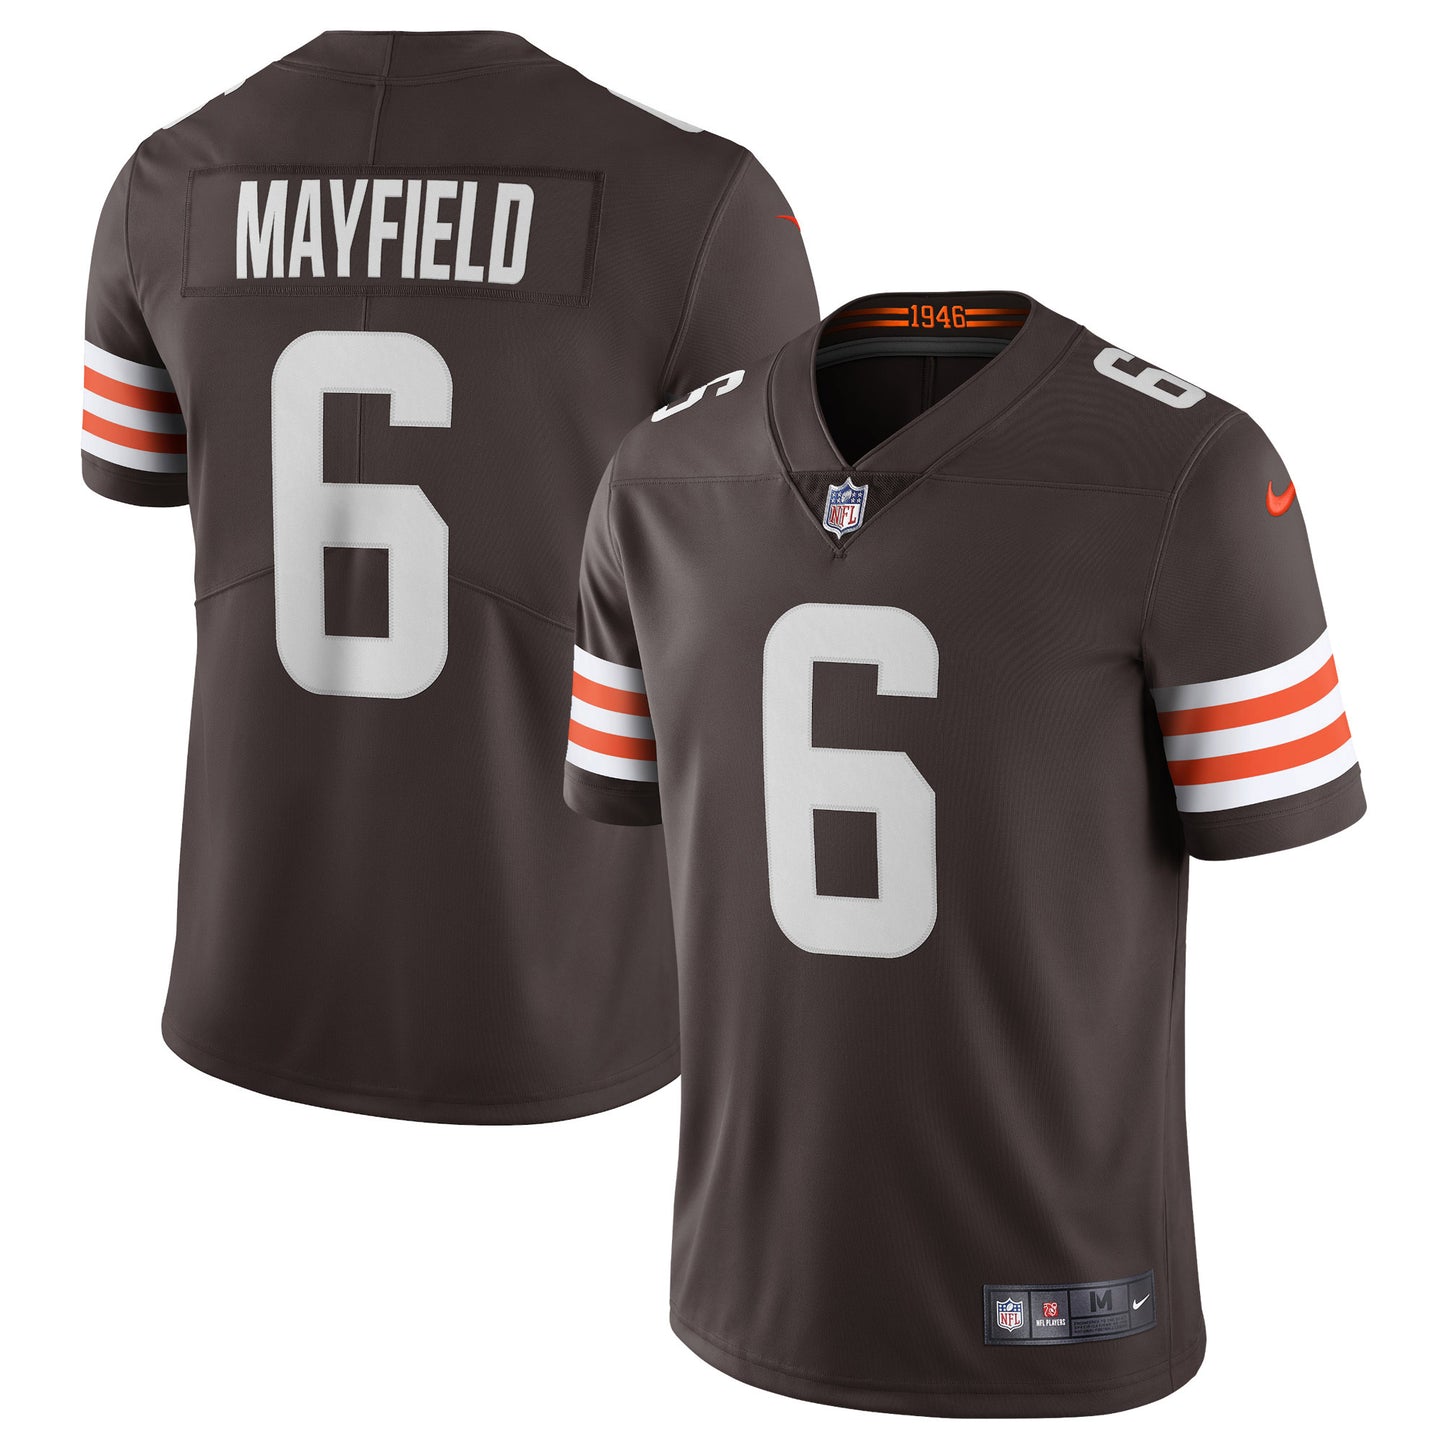 Baker Mayfield Cleveland Browns Nike Vapor Limited Player Jersey - Brown